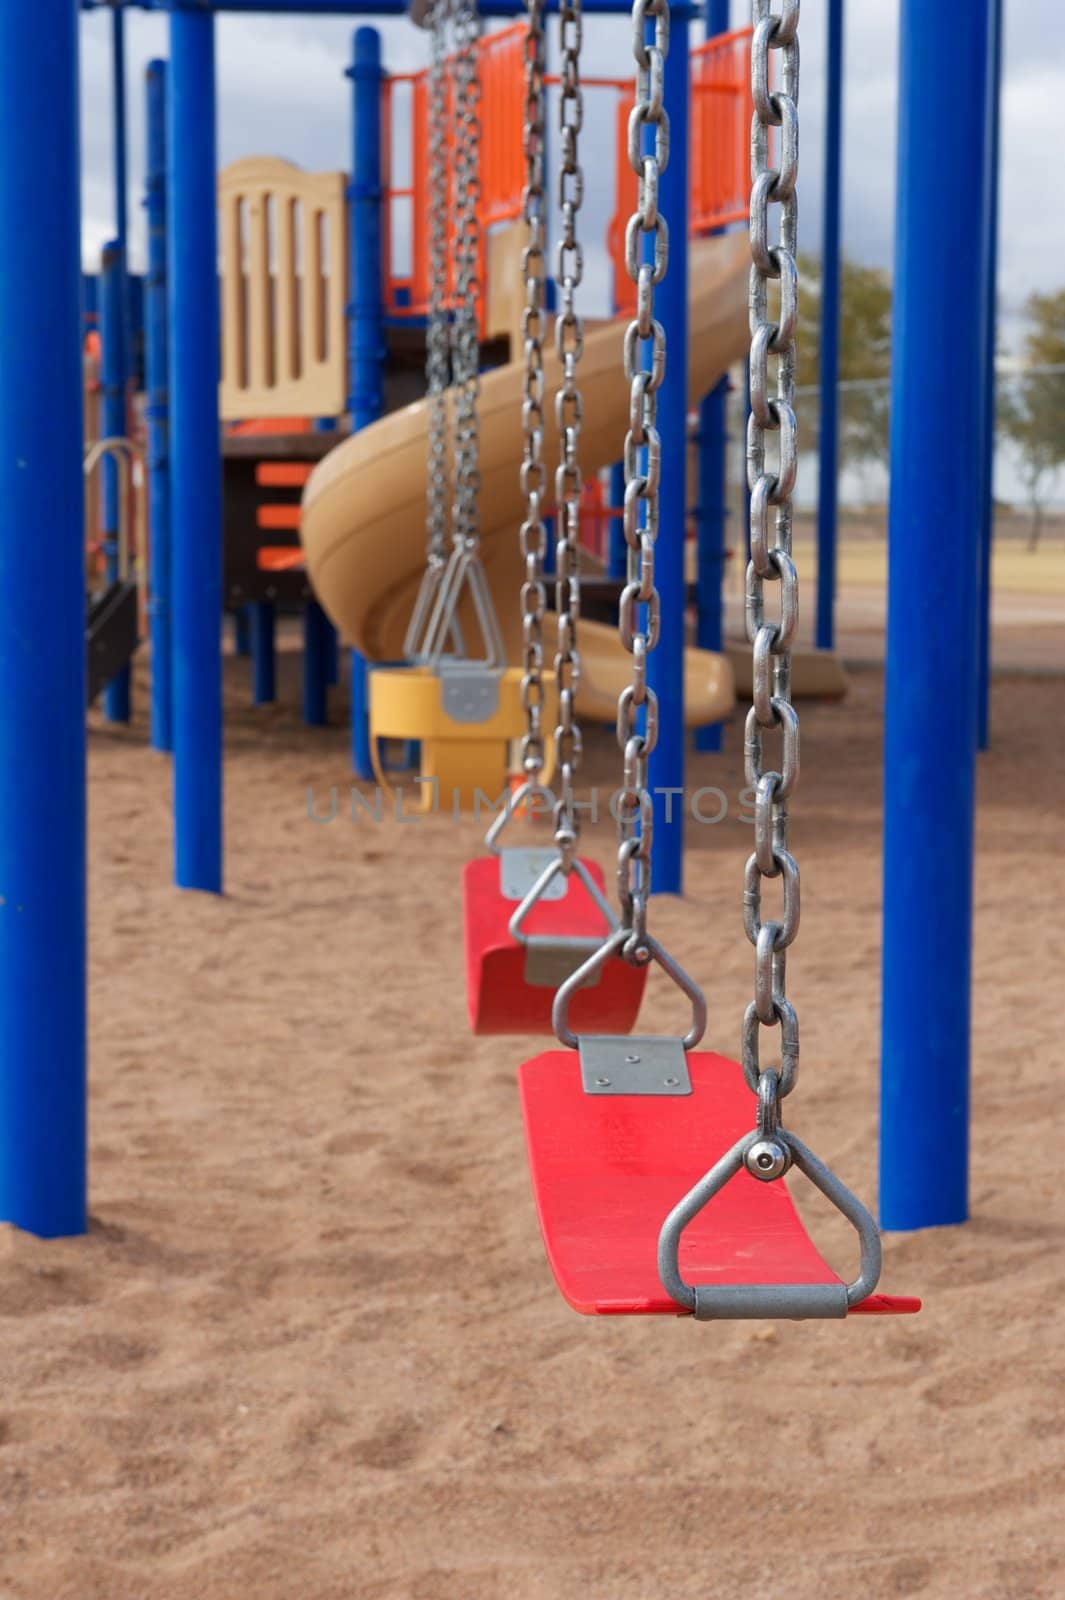 A vertical shot of school or park playground equipment with flexible swings